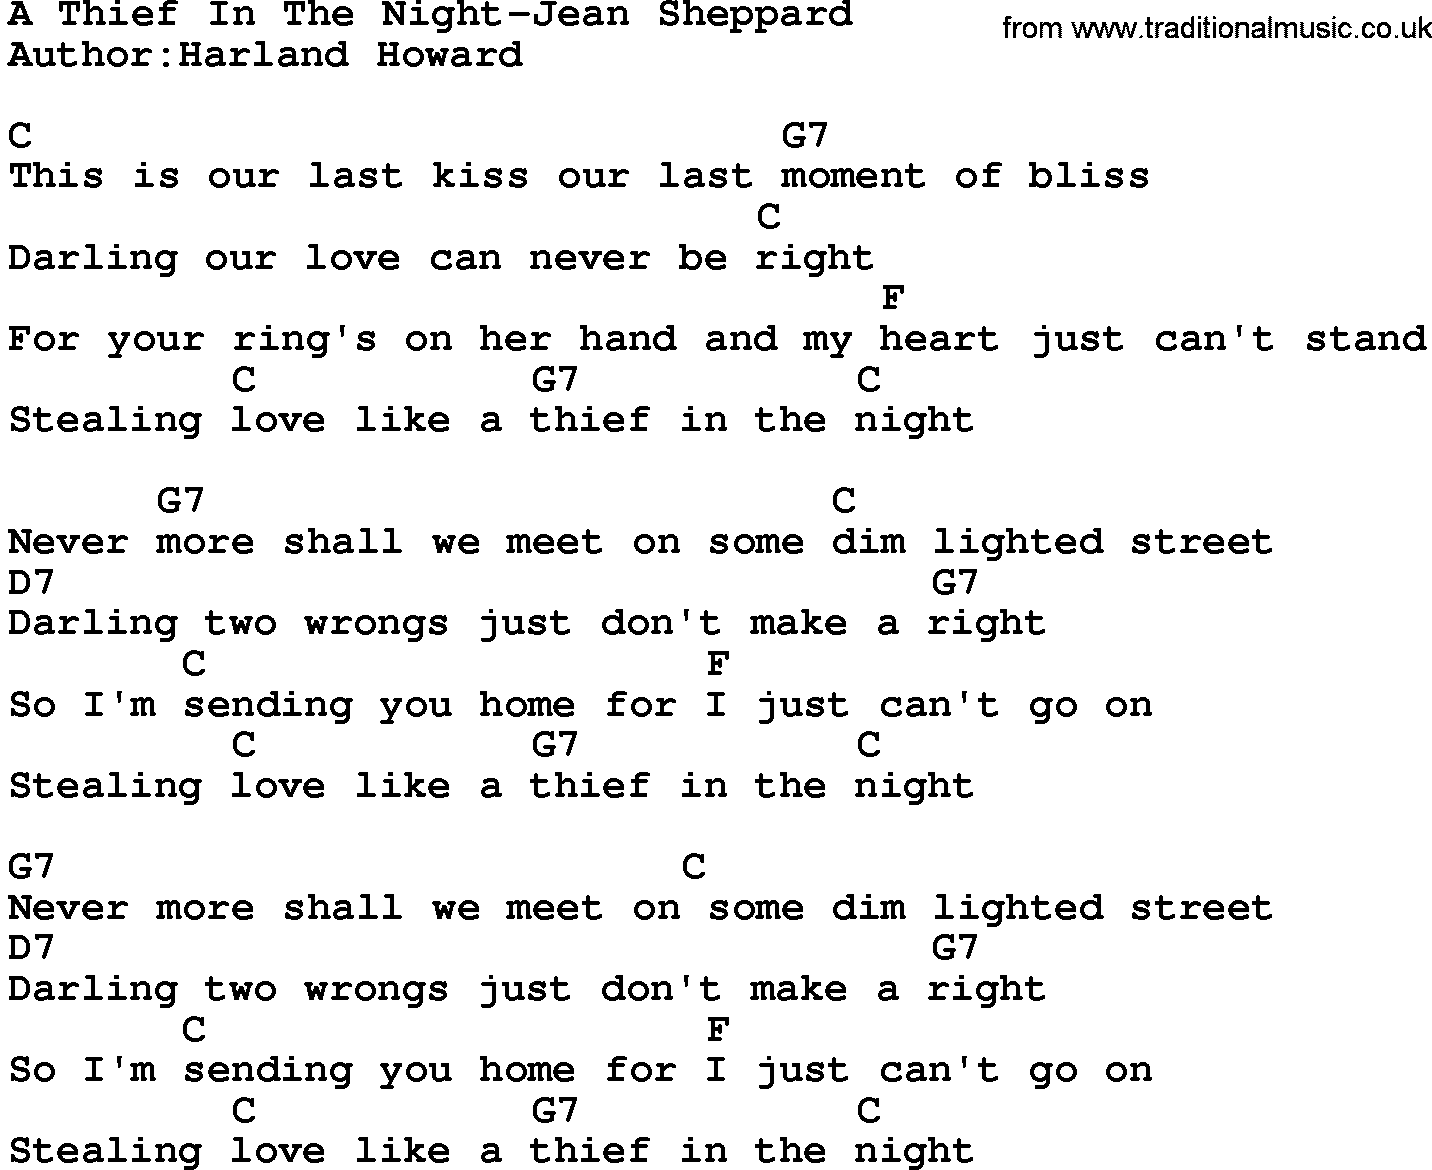 Country music song: A Thief In The Night-Jean Sheppard lyrics and chords